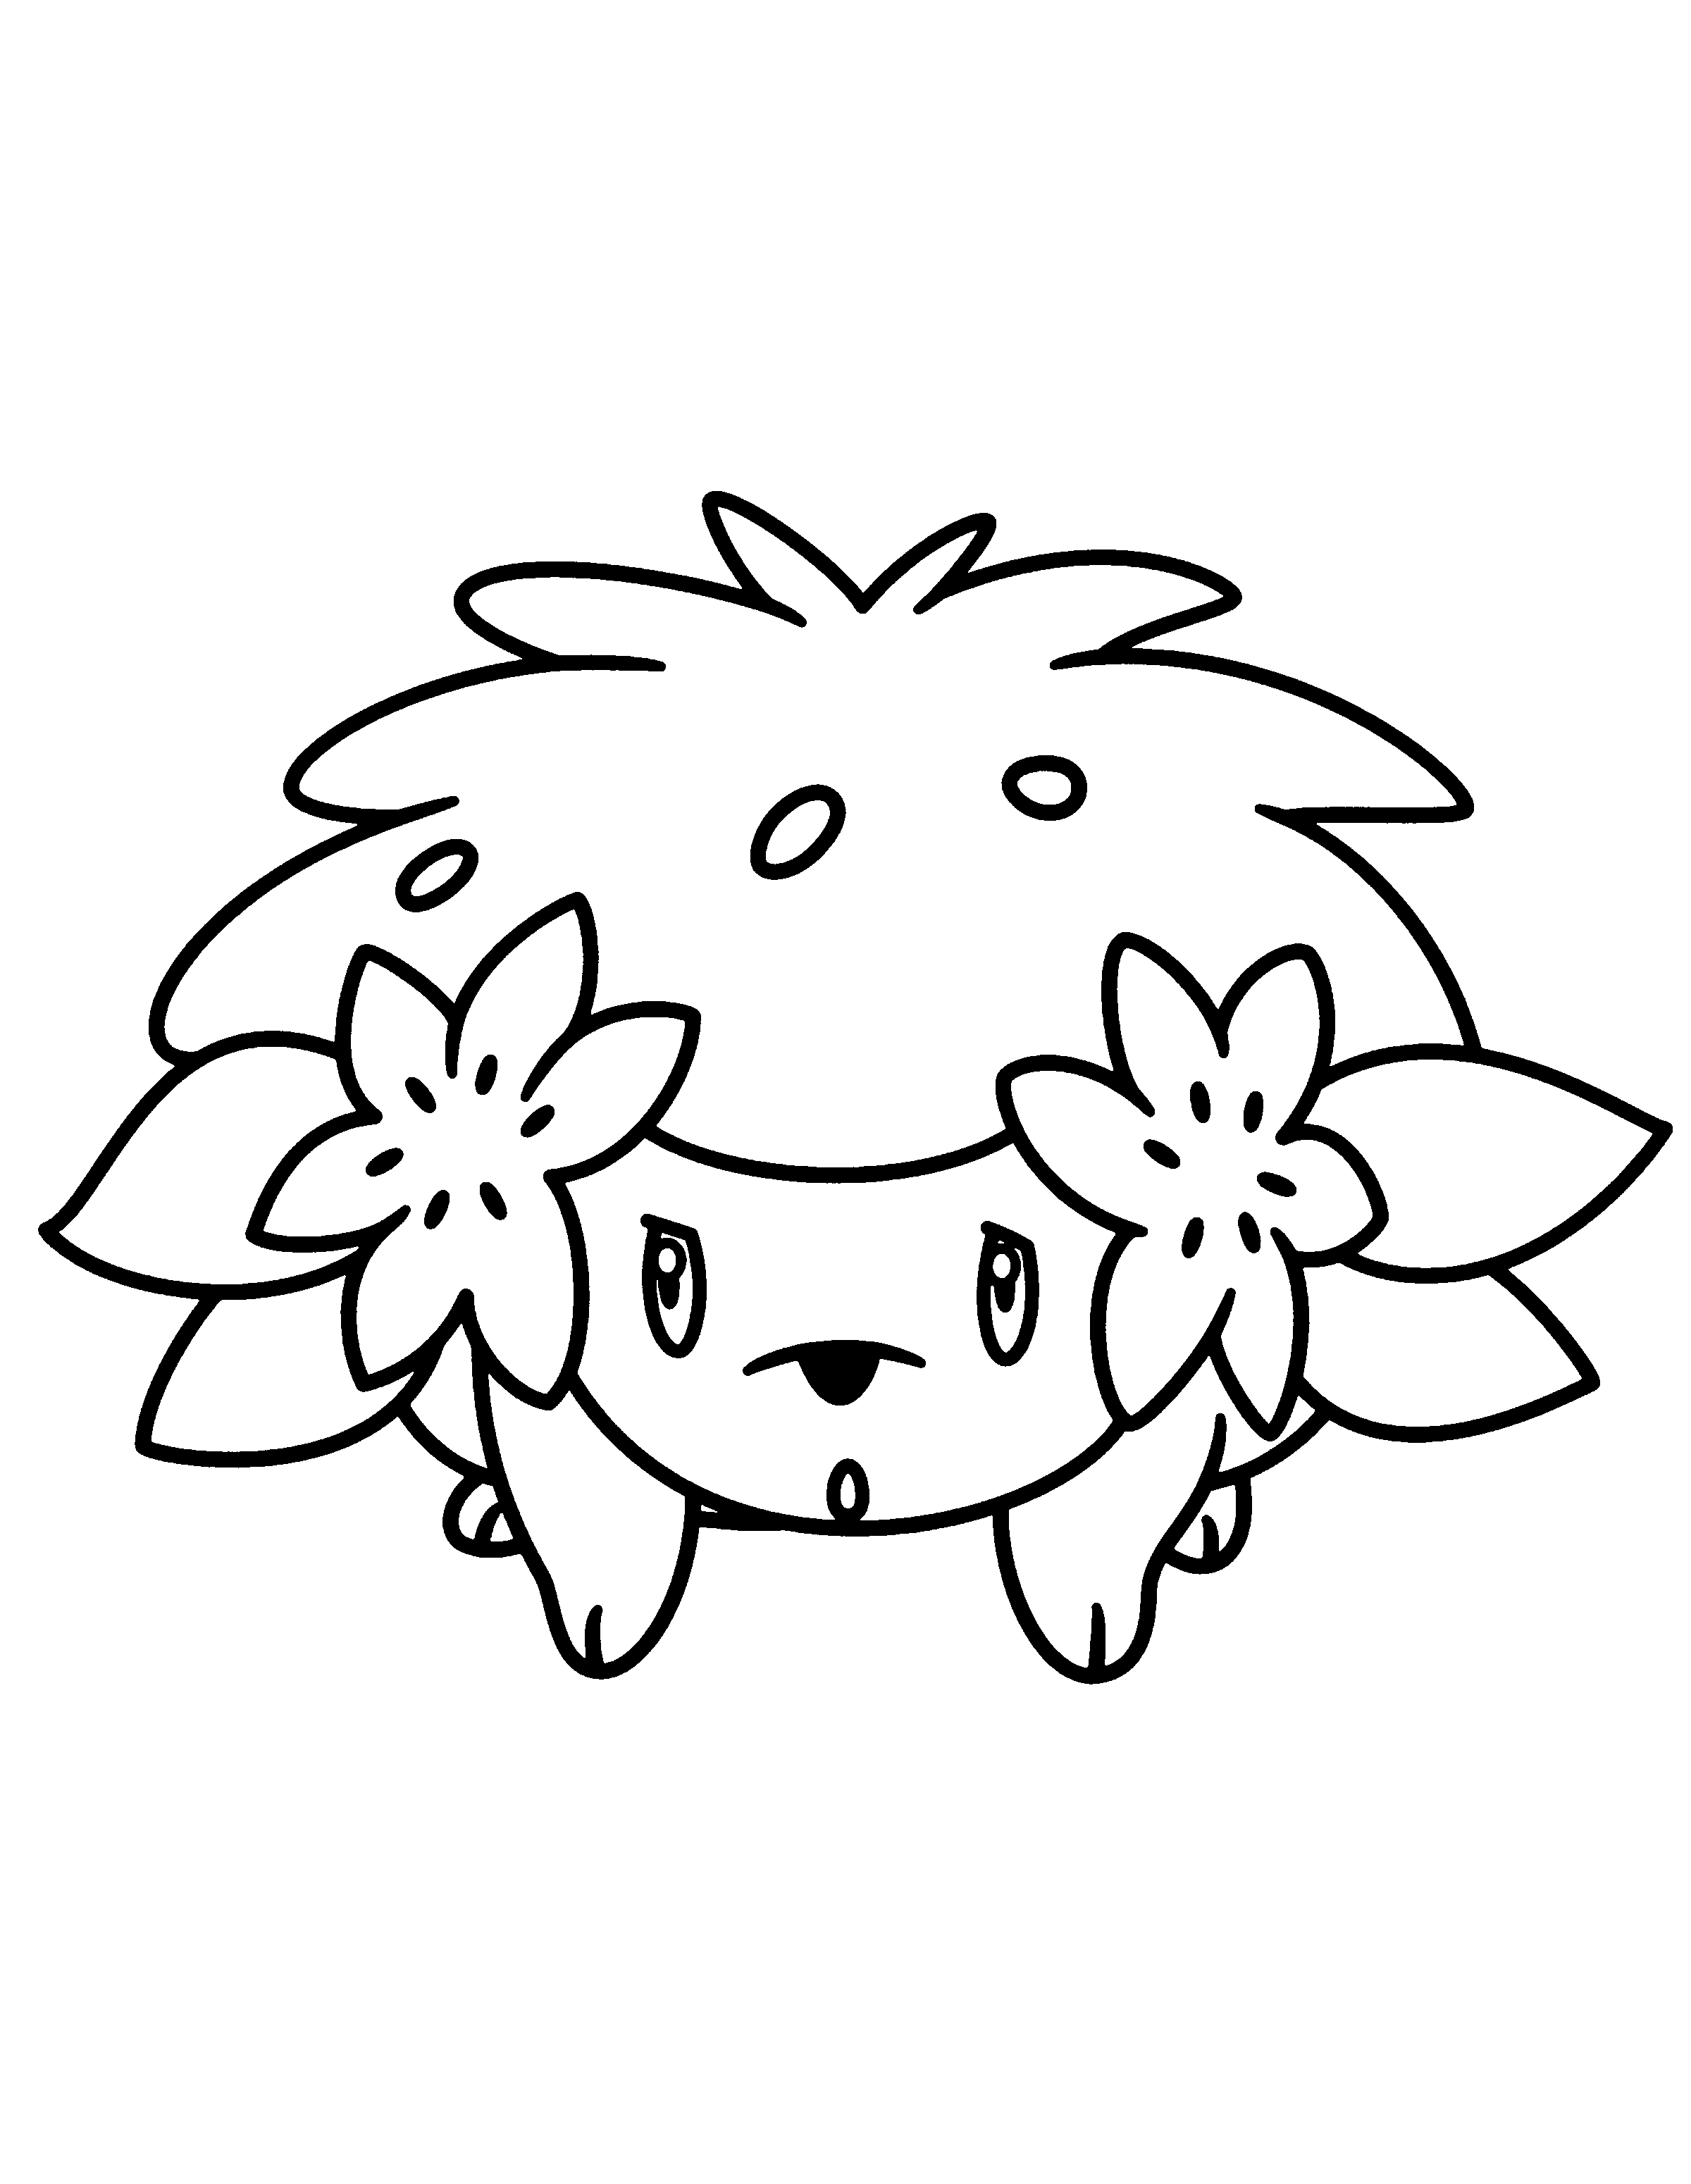 shaymin coloring pages